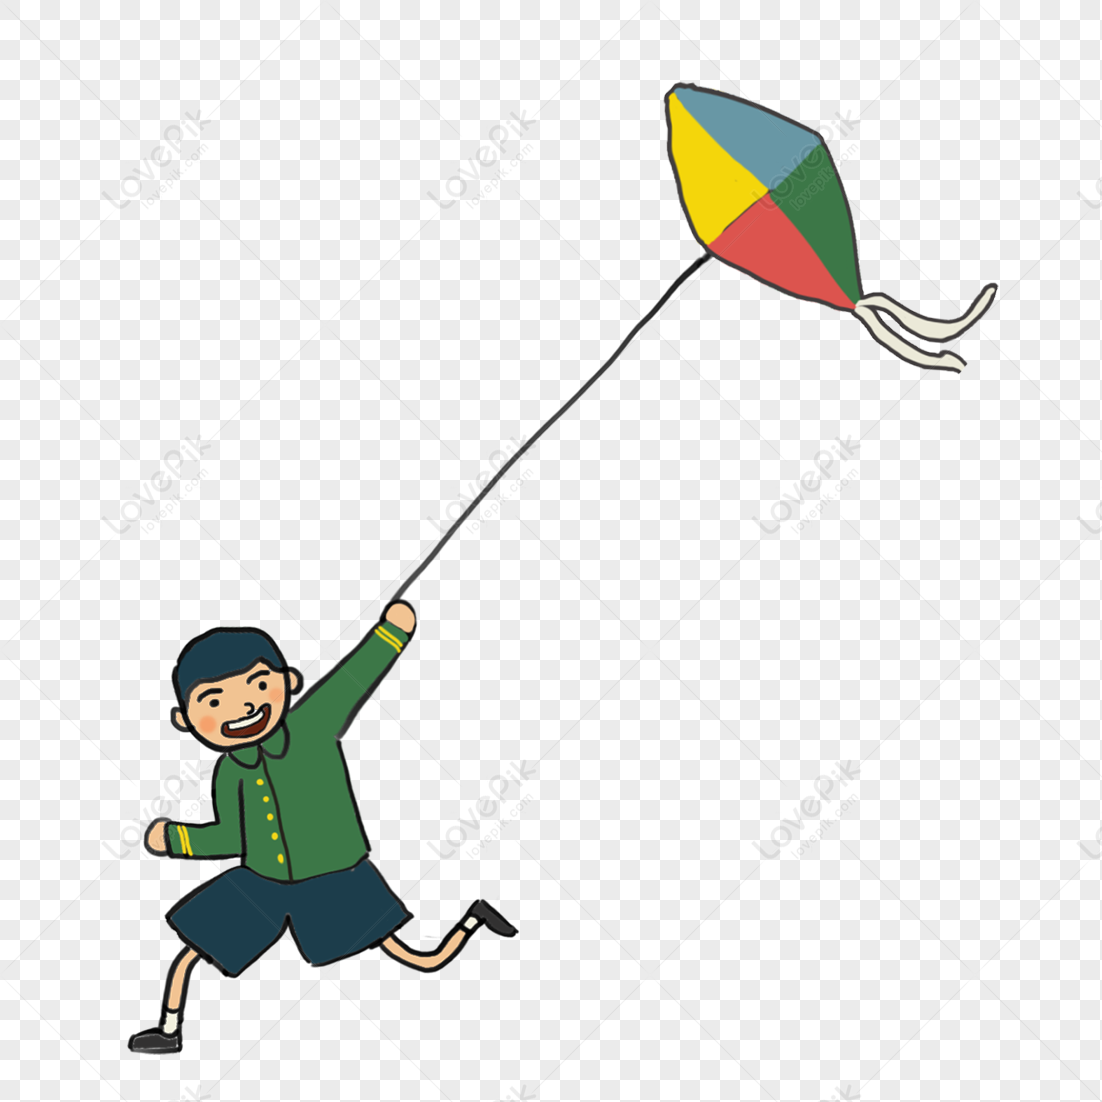 kite-flying-boy-png-image-free-download-and-clipart-image-for-free